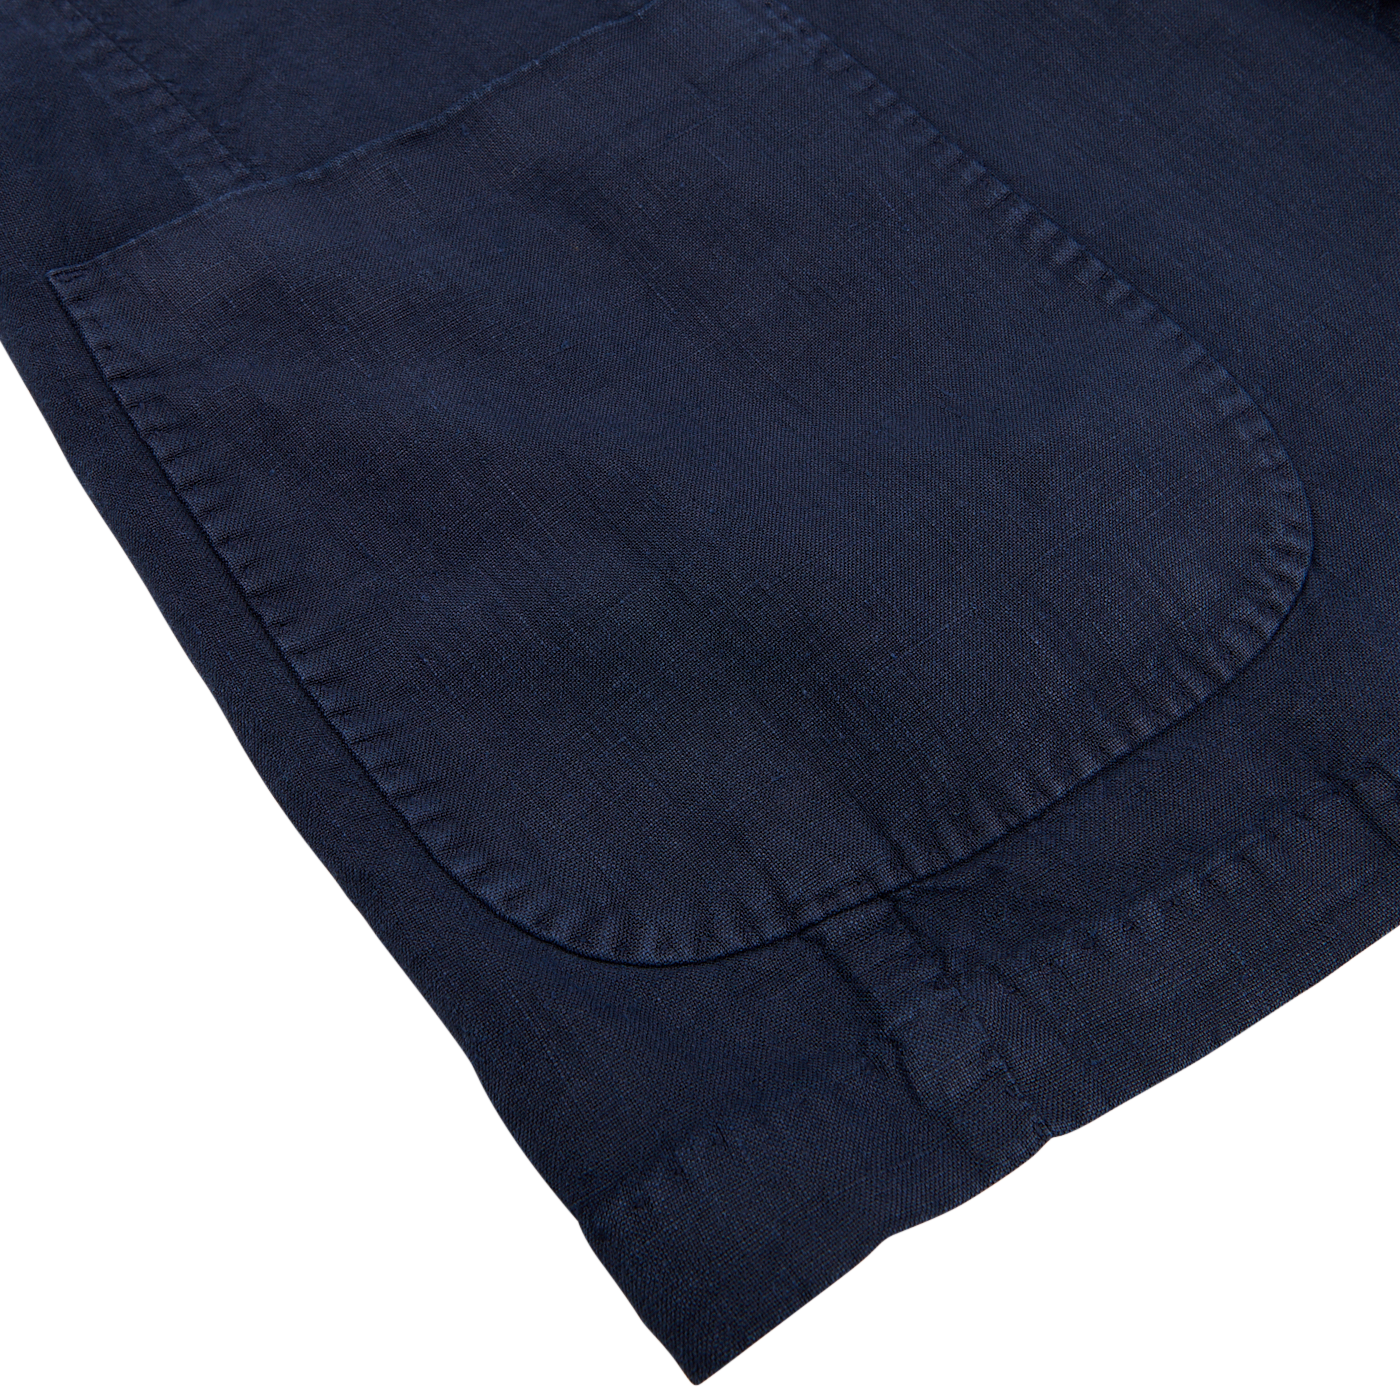 Close-up view of a L.B.M. 1911 navy blue washed linen suit with detailed stitching.